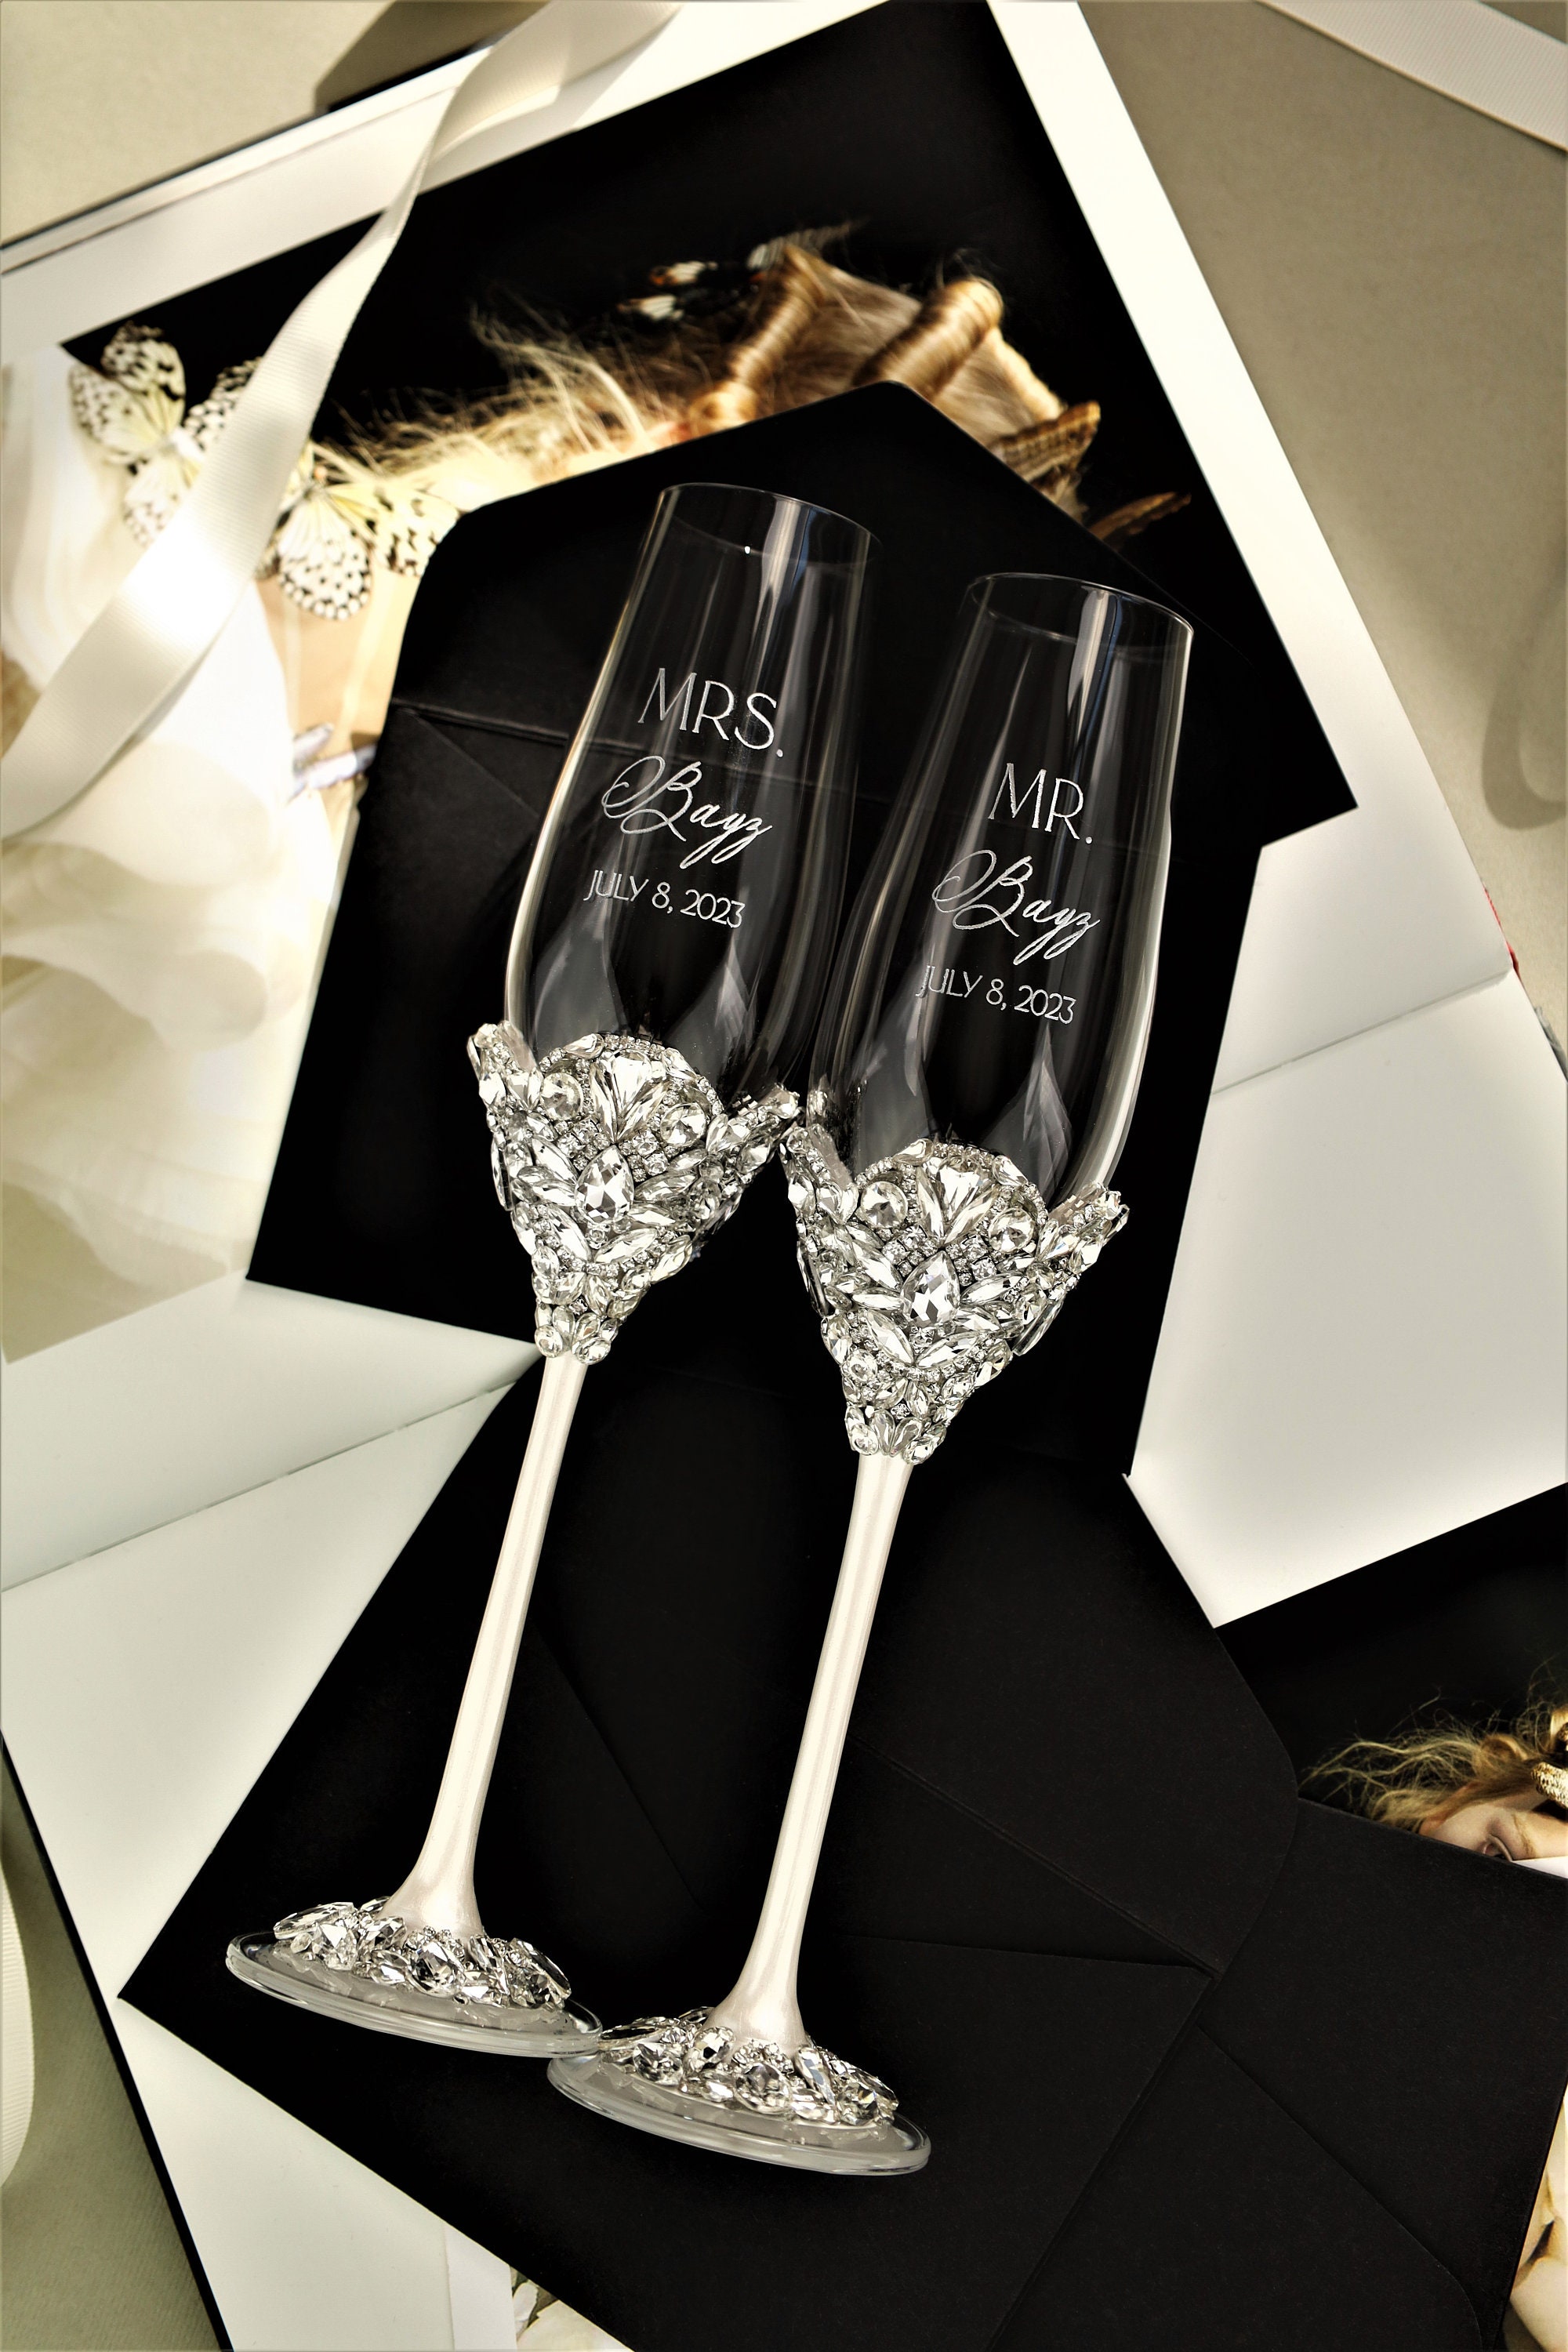 10th Wedding Anniversary Gifts for Couple Wedding Champagne Flutes Gold  Bridal Shower Gifts Personalized Toasting Glasses Gifts for Parents 